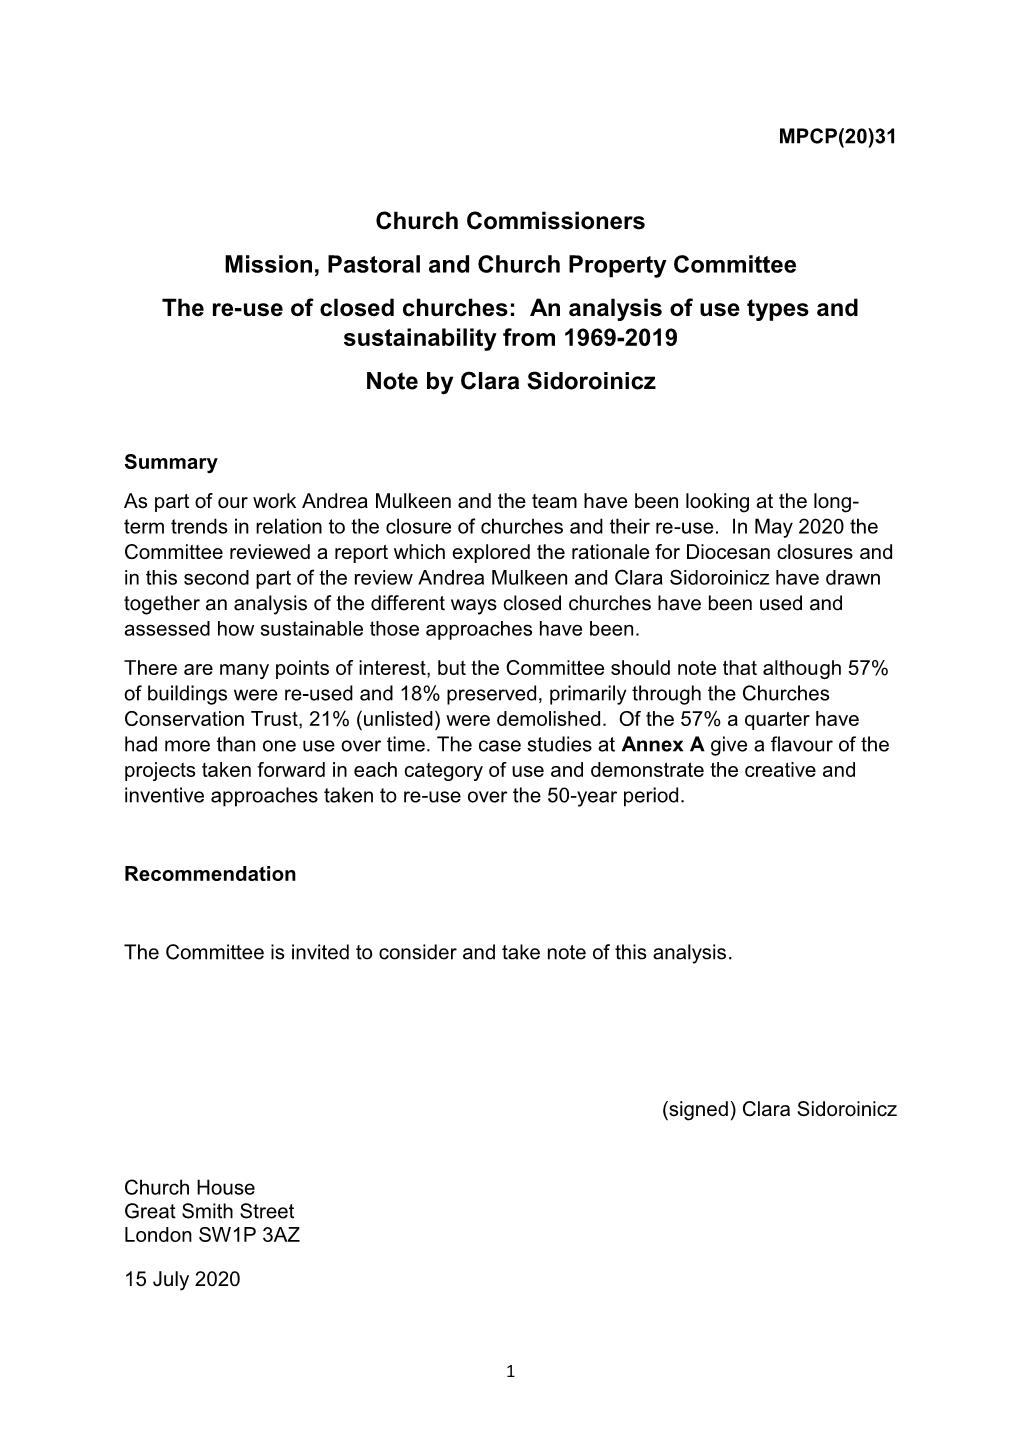 Church Commissioners Mission, Pastoral and Church Property